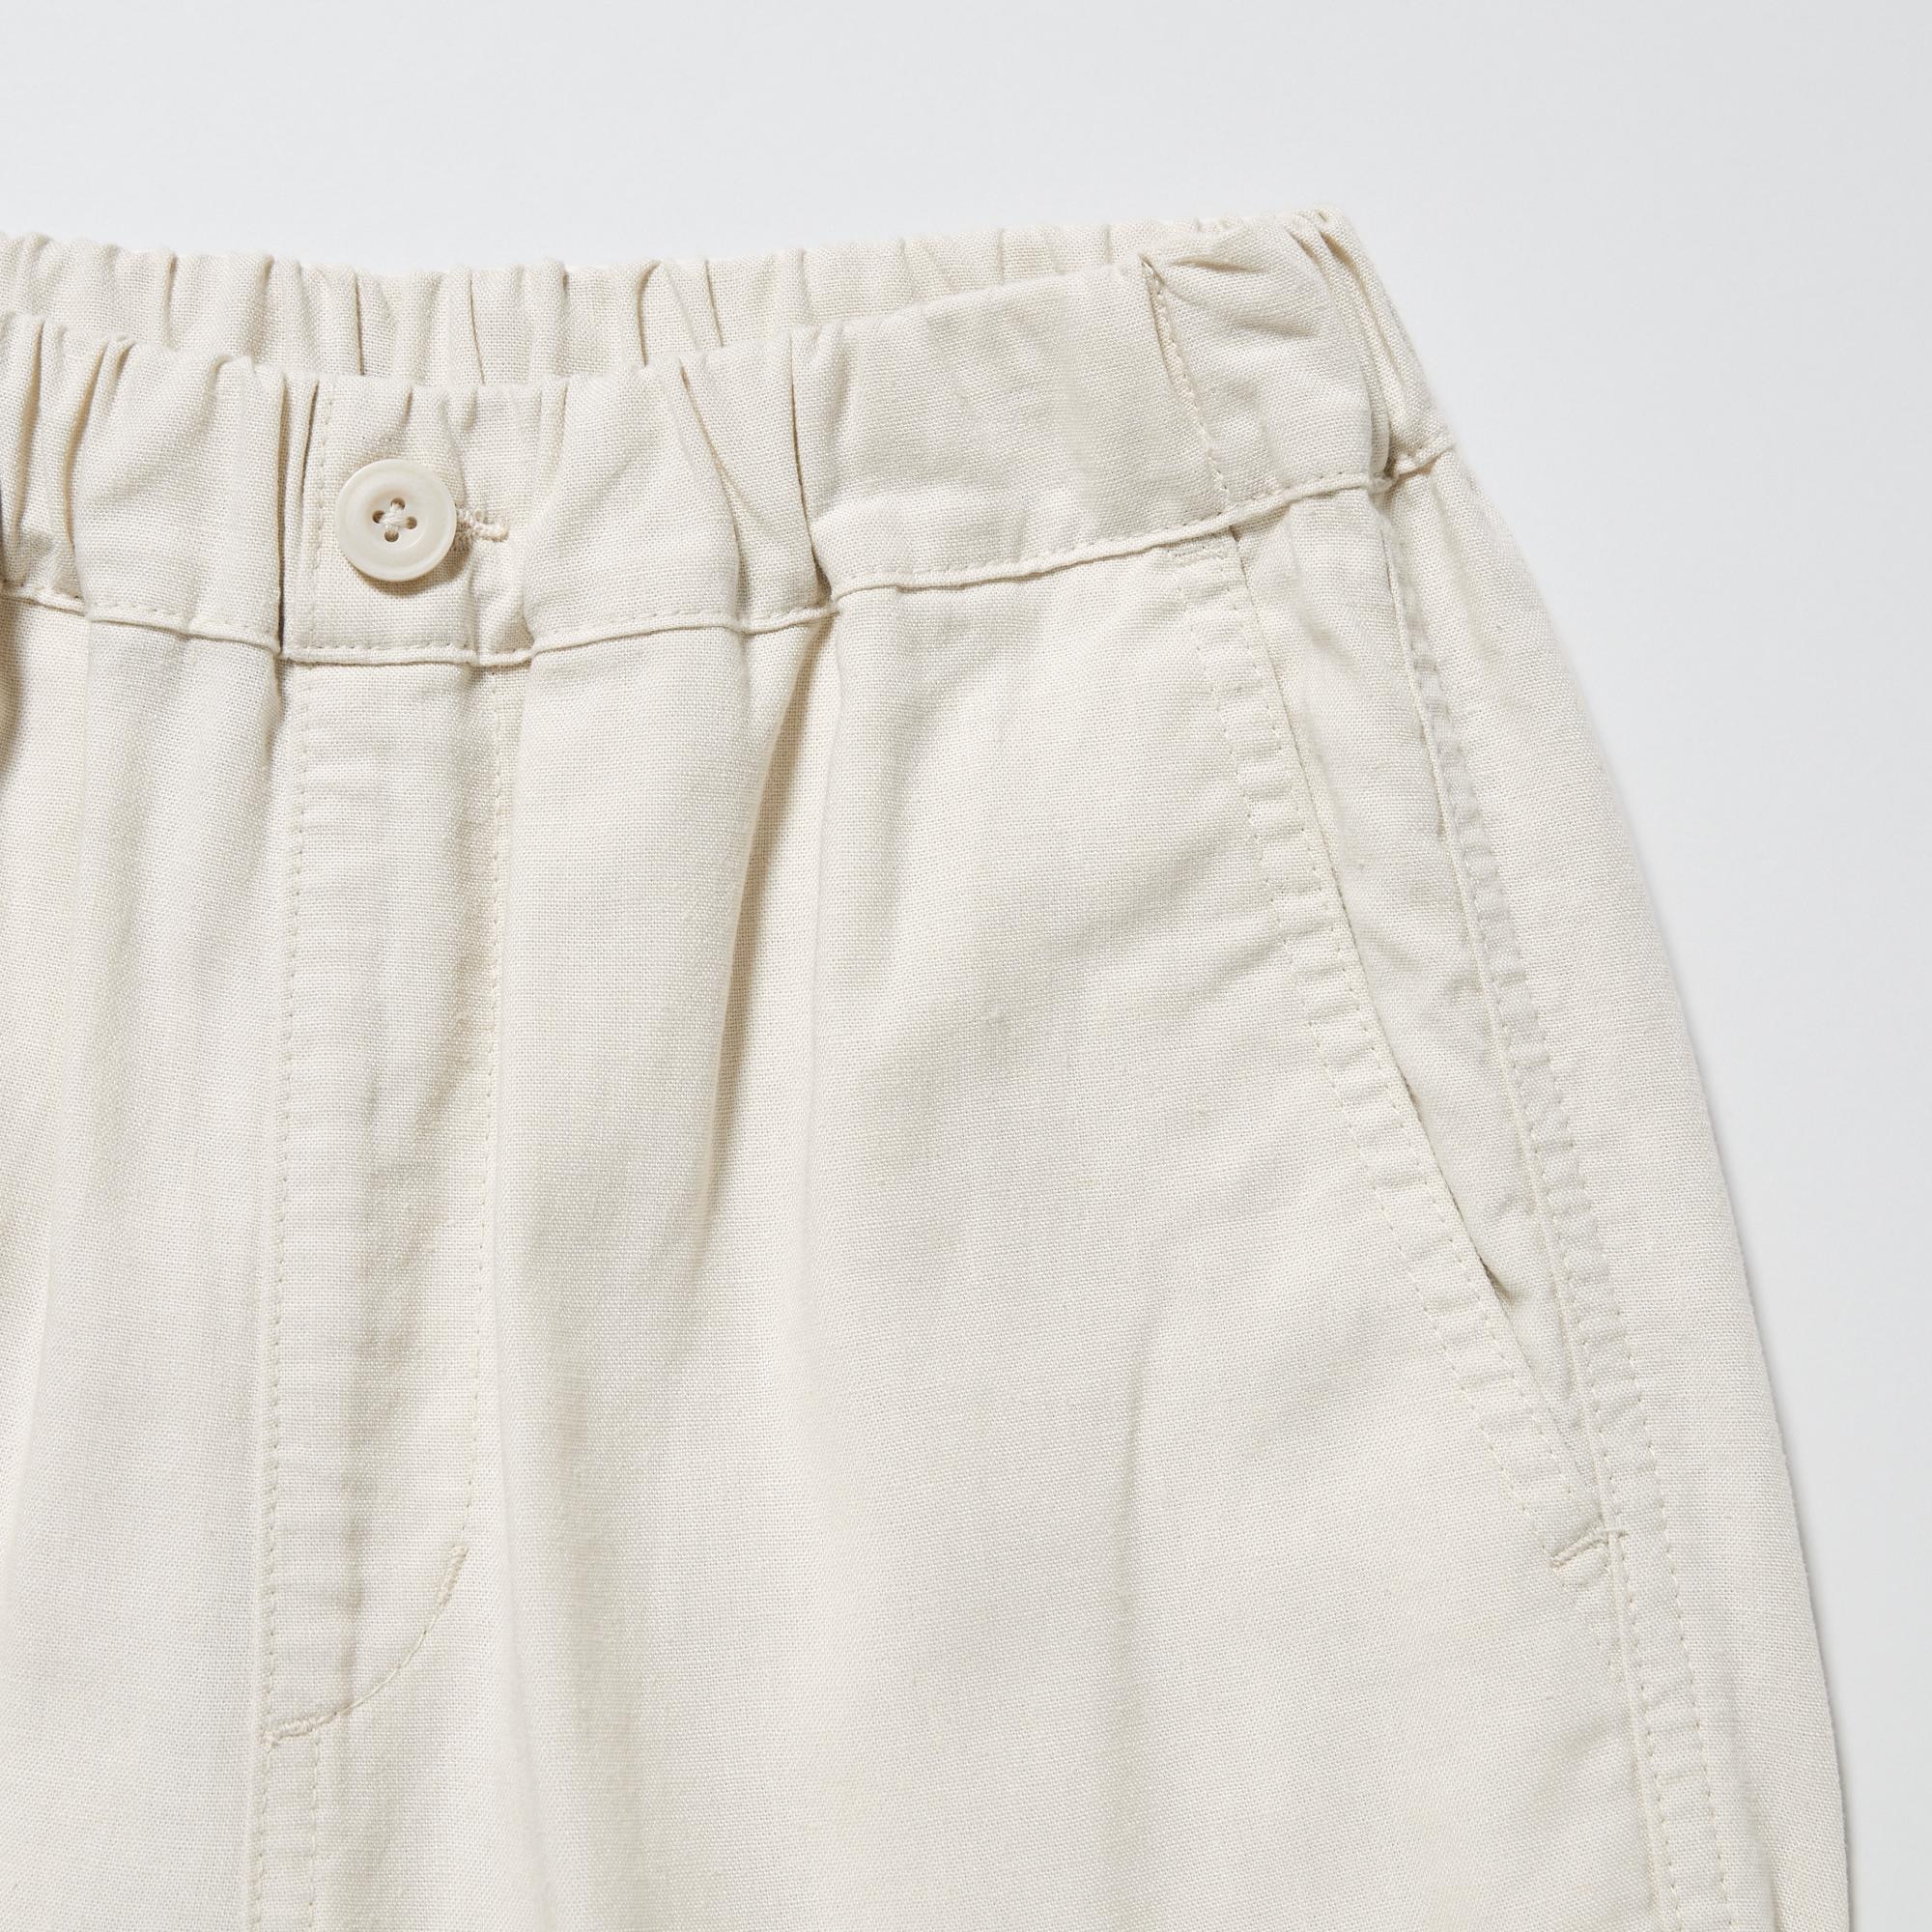 Buy Kids Linen Trousers With Braces, Kids Linen Pants Online in India - Etsy